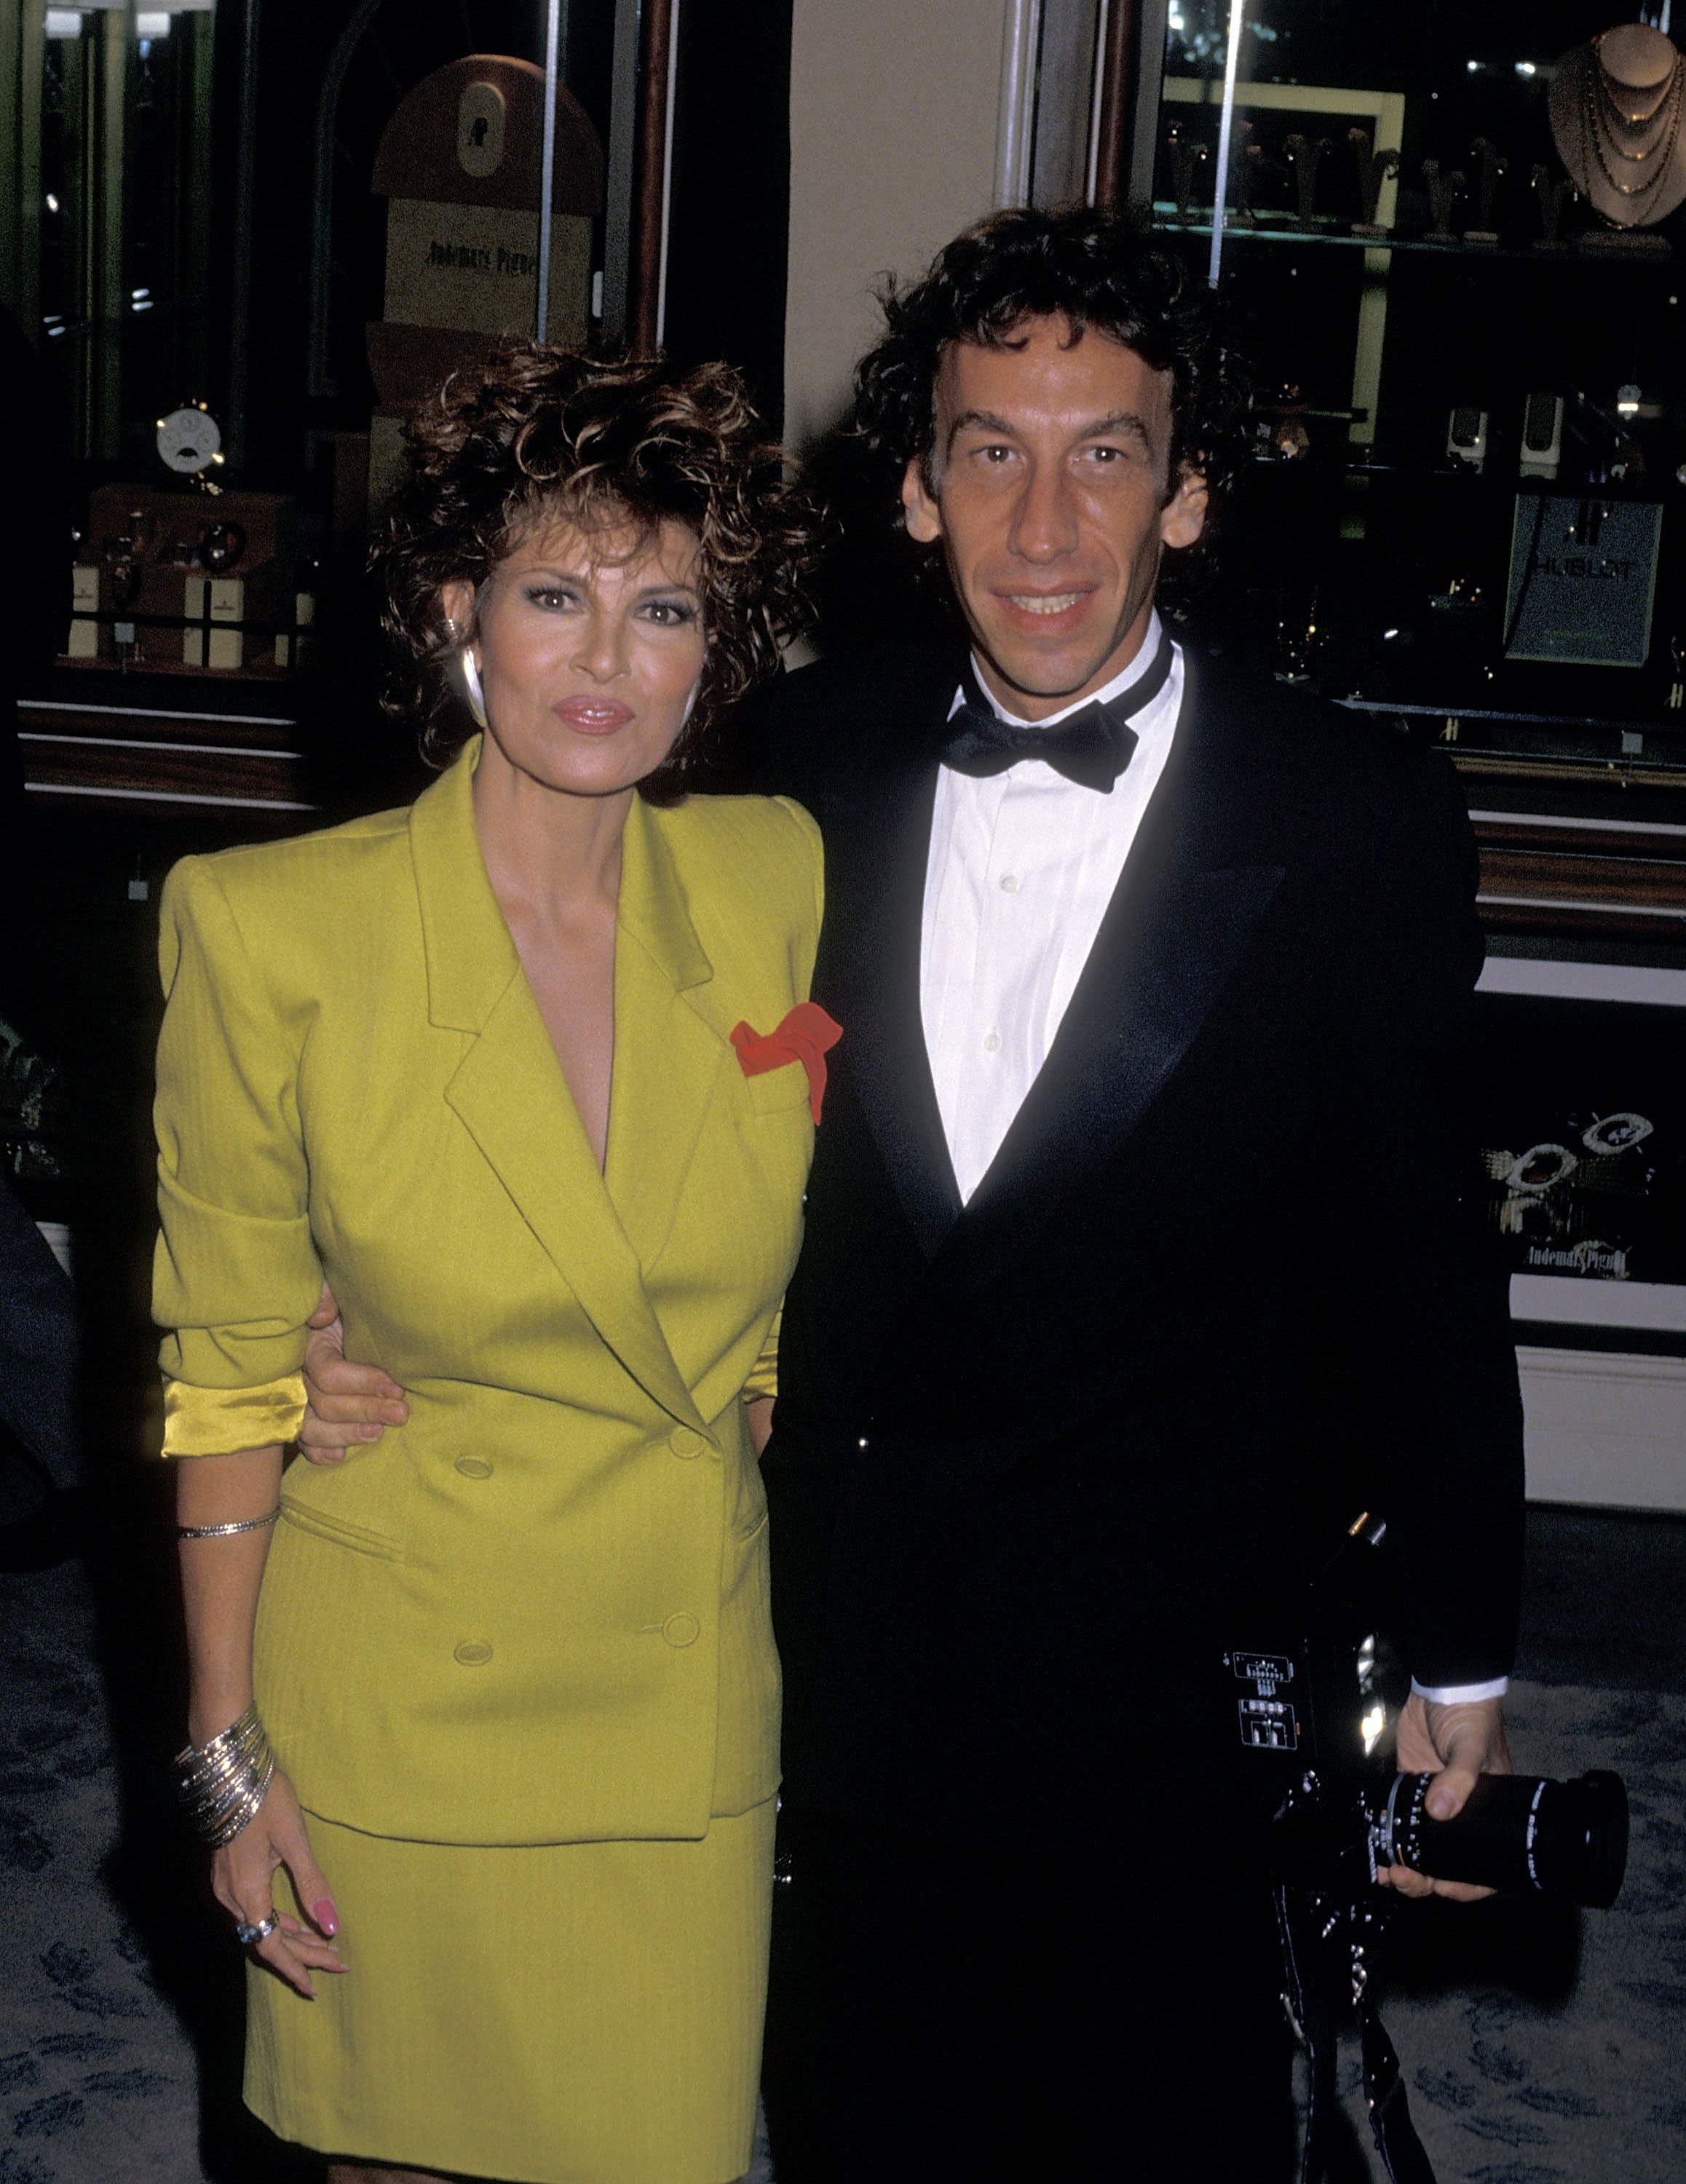 Actress Raquel Welch and husband Andre Weinfeld at the 45th Annual Golden Globe Awards on January 23, 1988 at Beverly Hilton Hotel in Beverly Hills, California. | Source: Getty Images